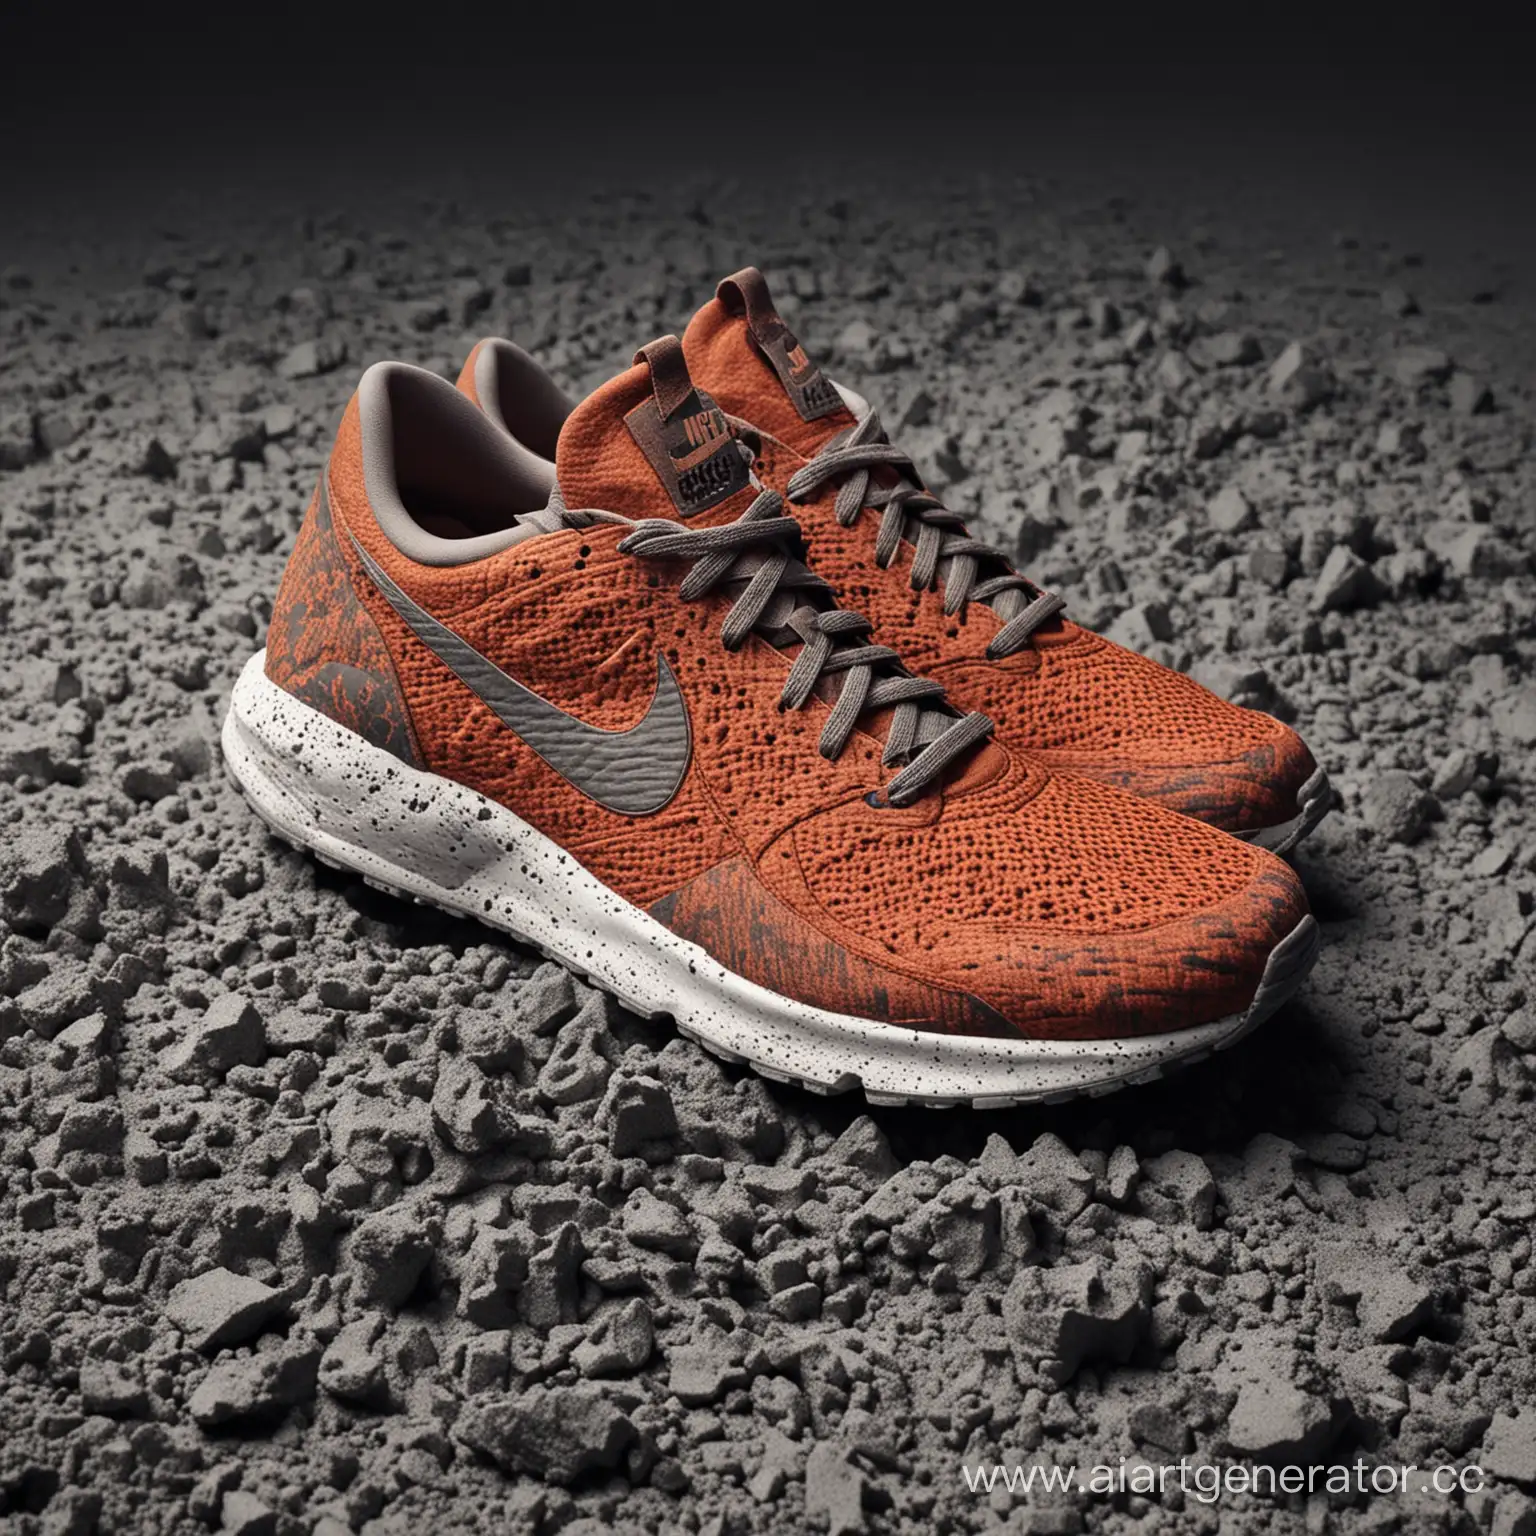 Nike sneakers with volcanic eruption texture and pattern